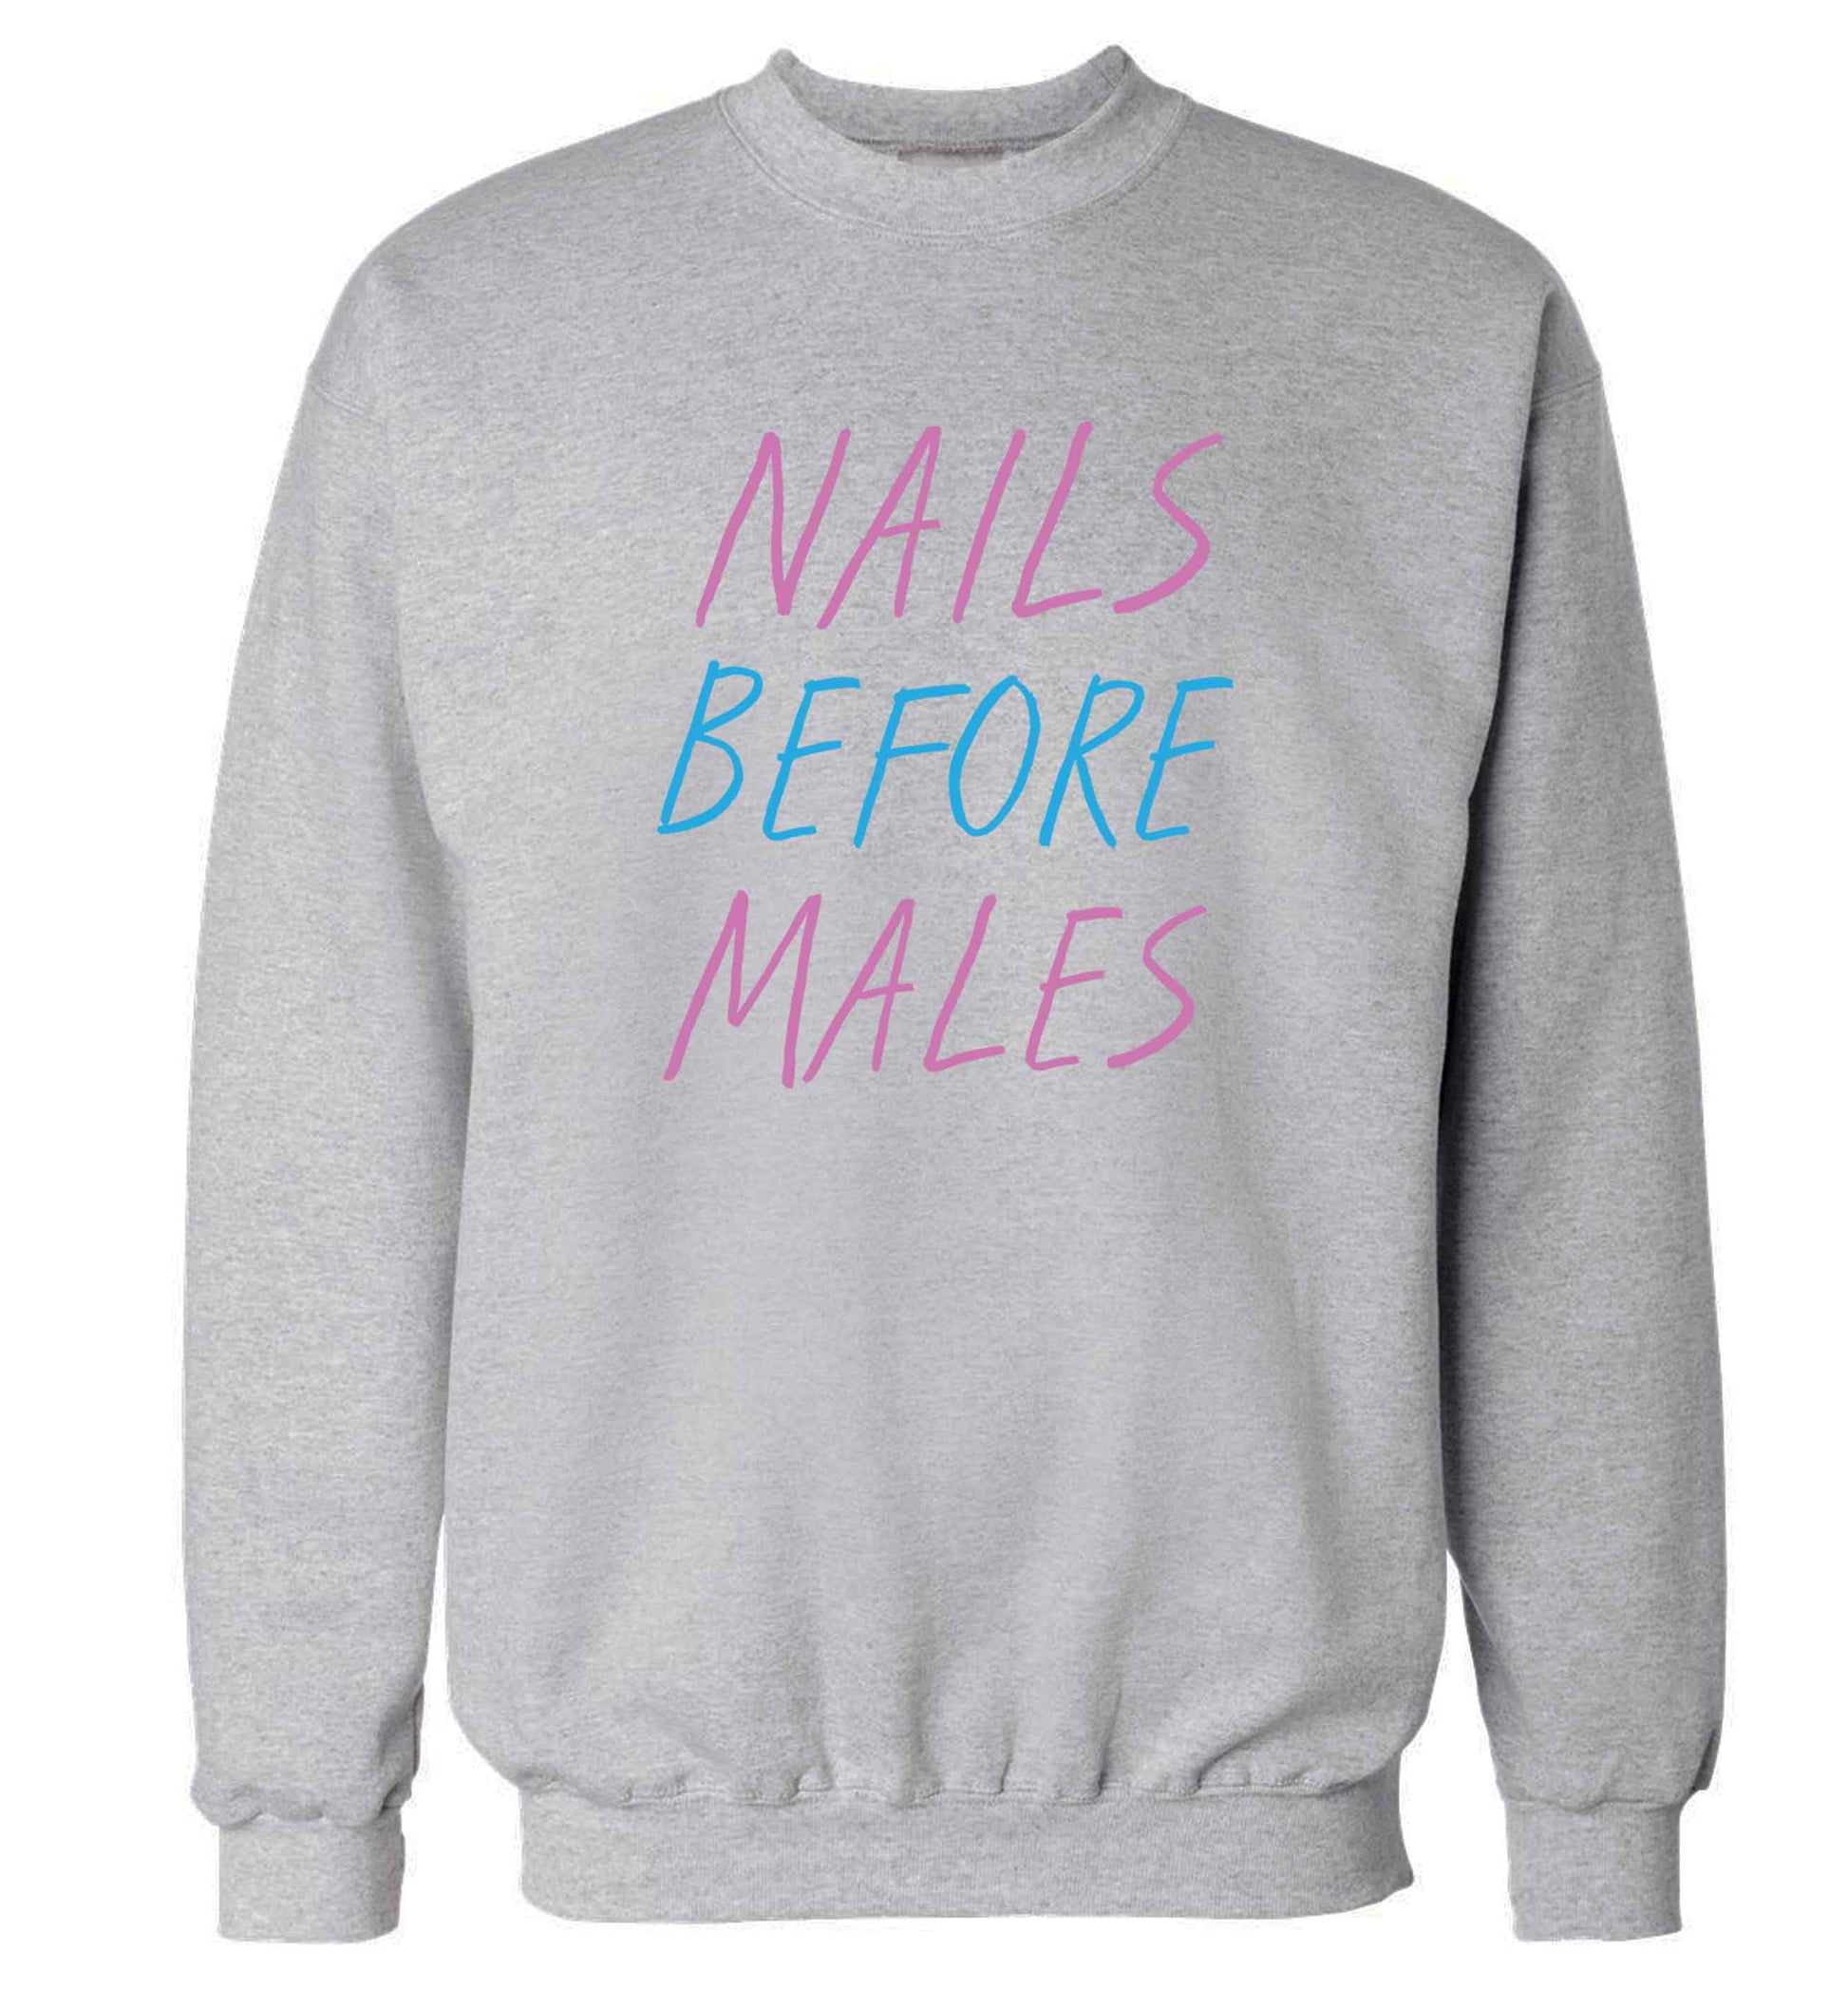 Nails before males adult's unisex grey sweater 2XL